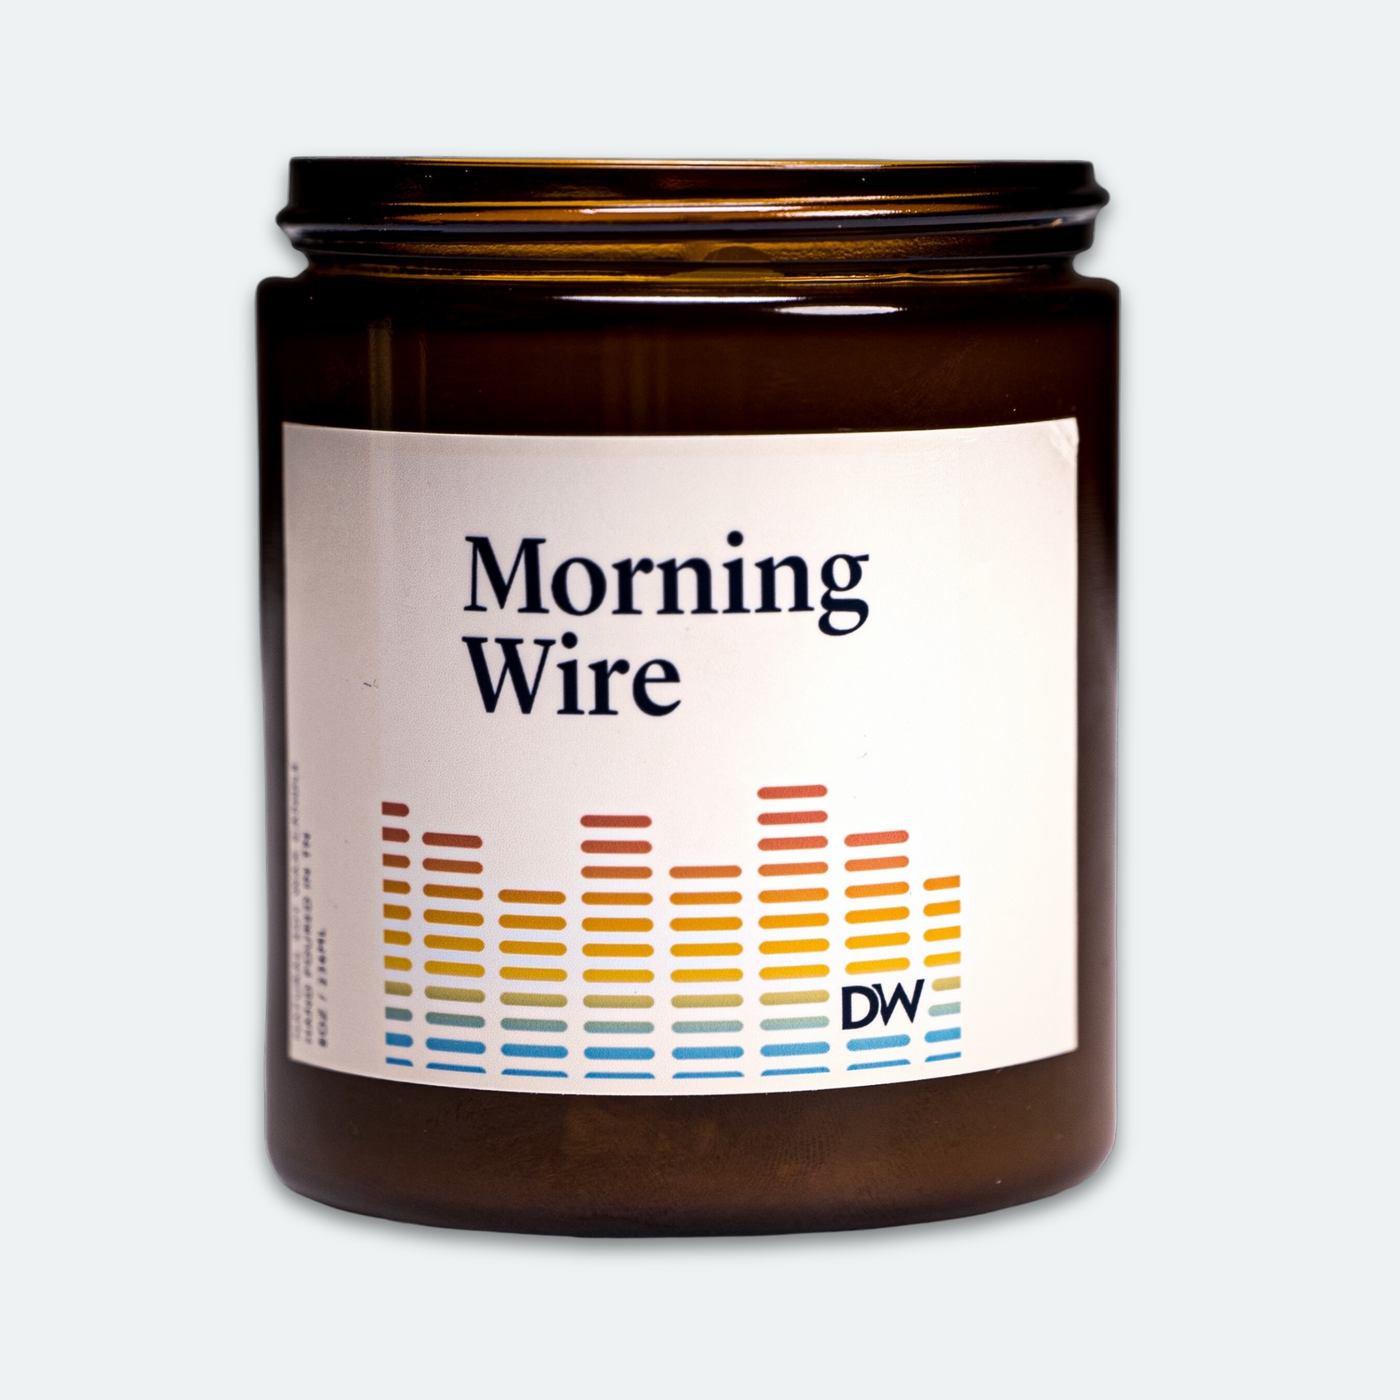 Morning Wire Candle